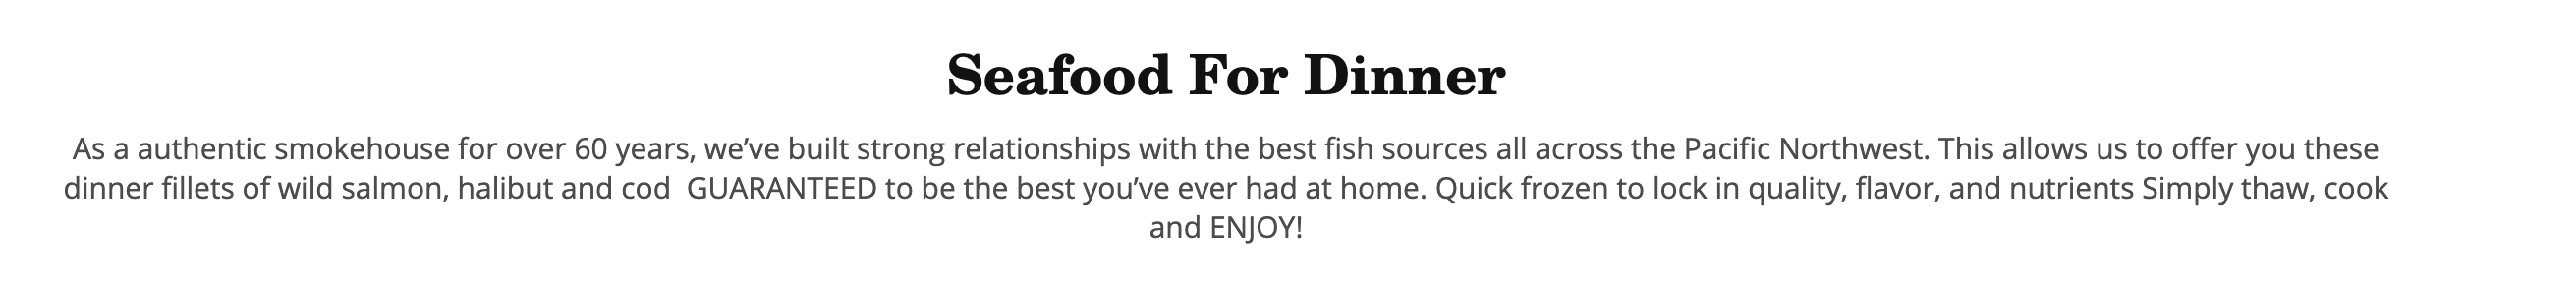 image-811839-Seafood_for_Dinner-45c48.png